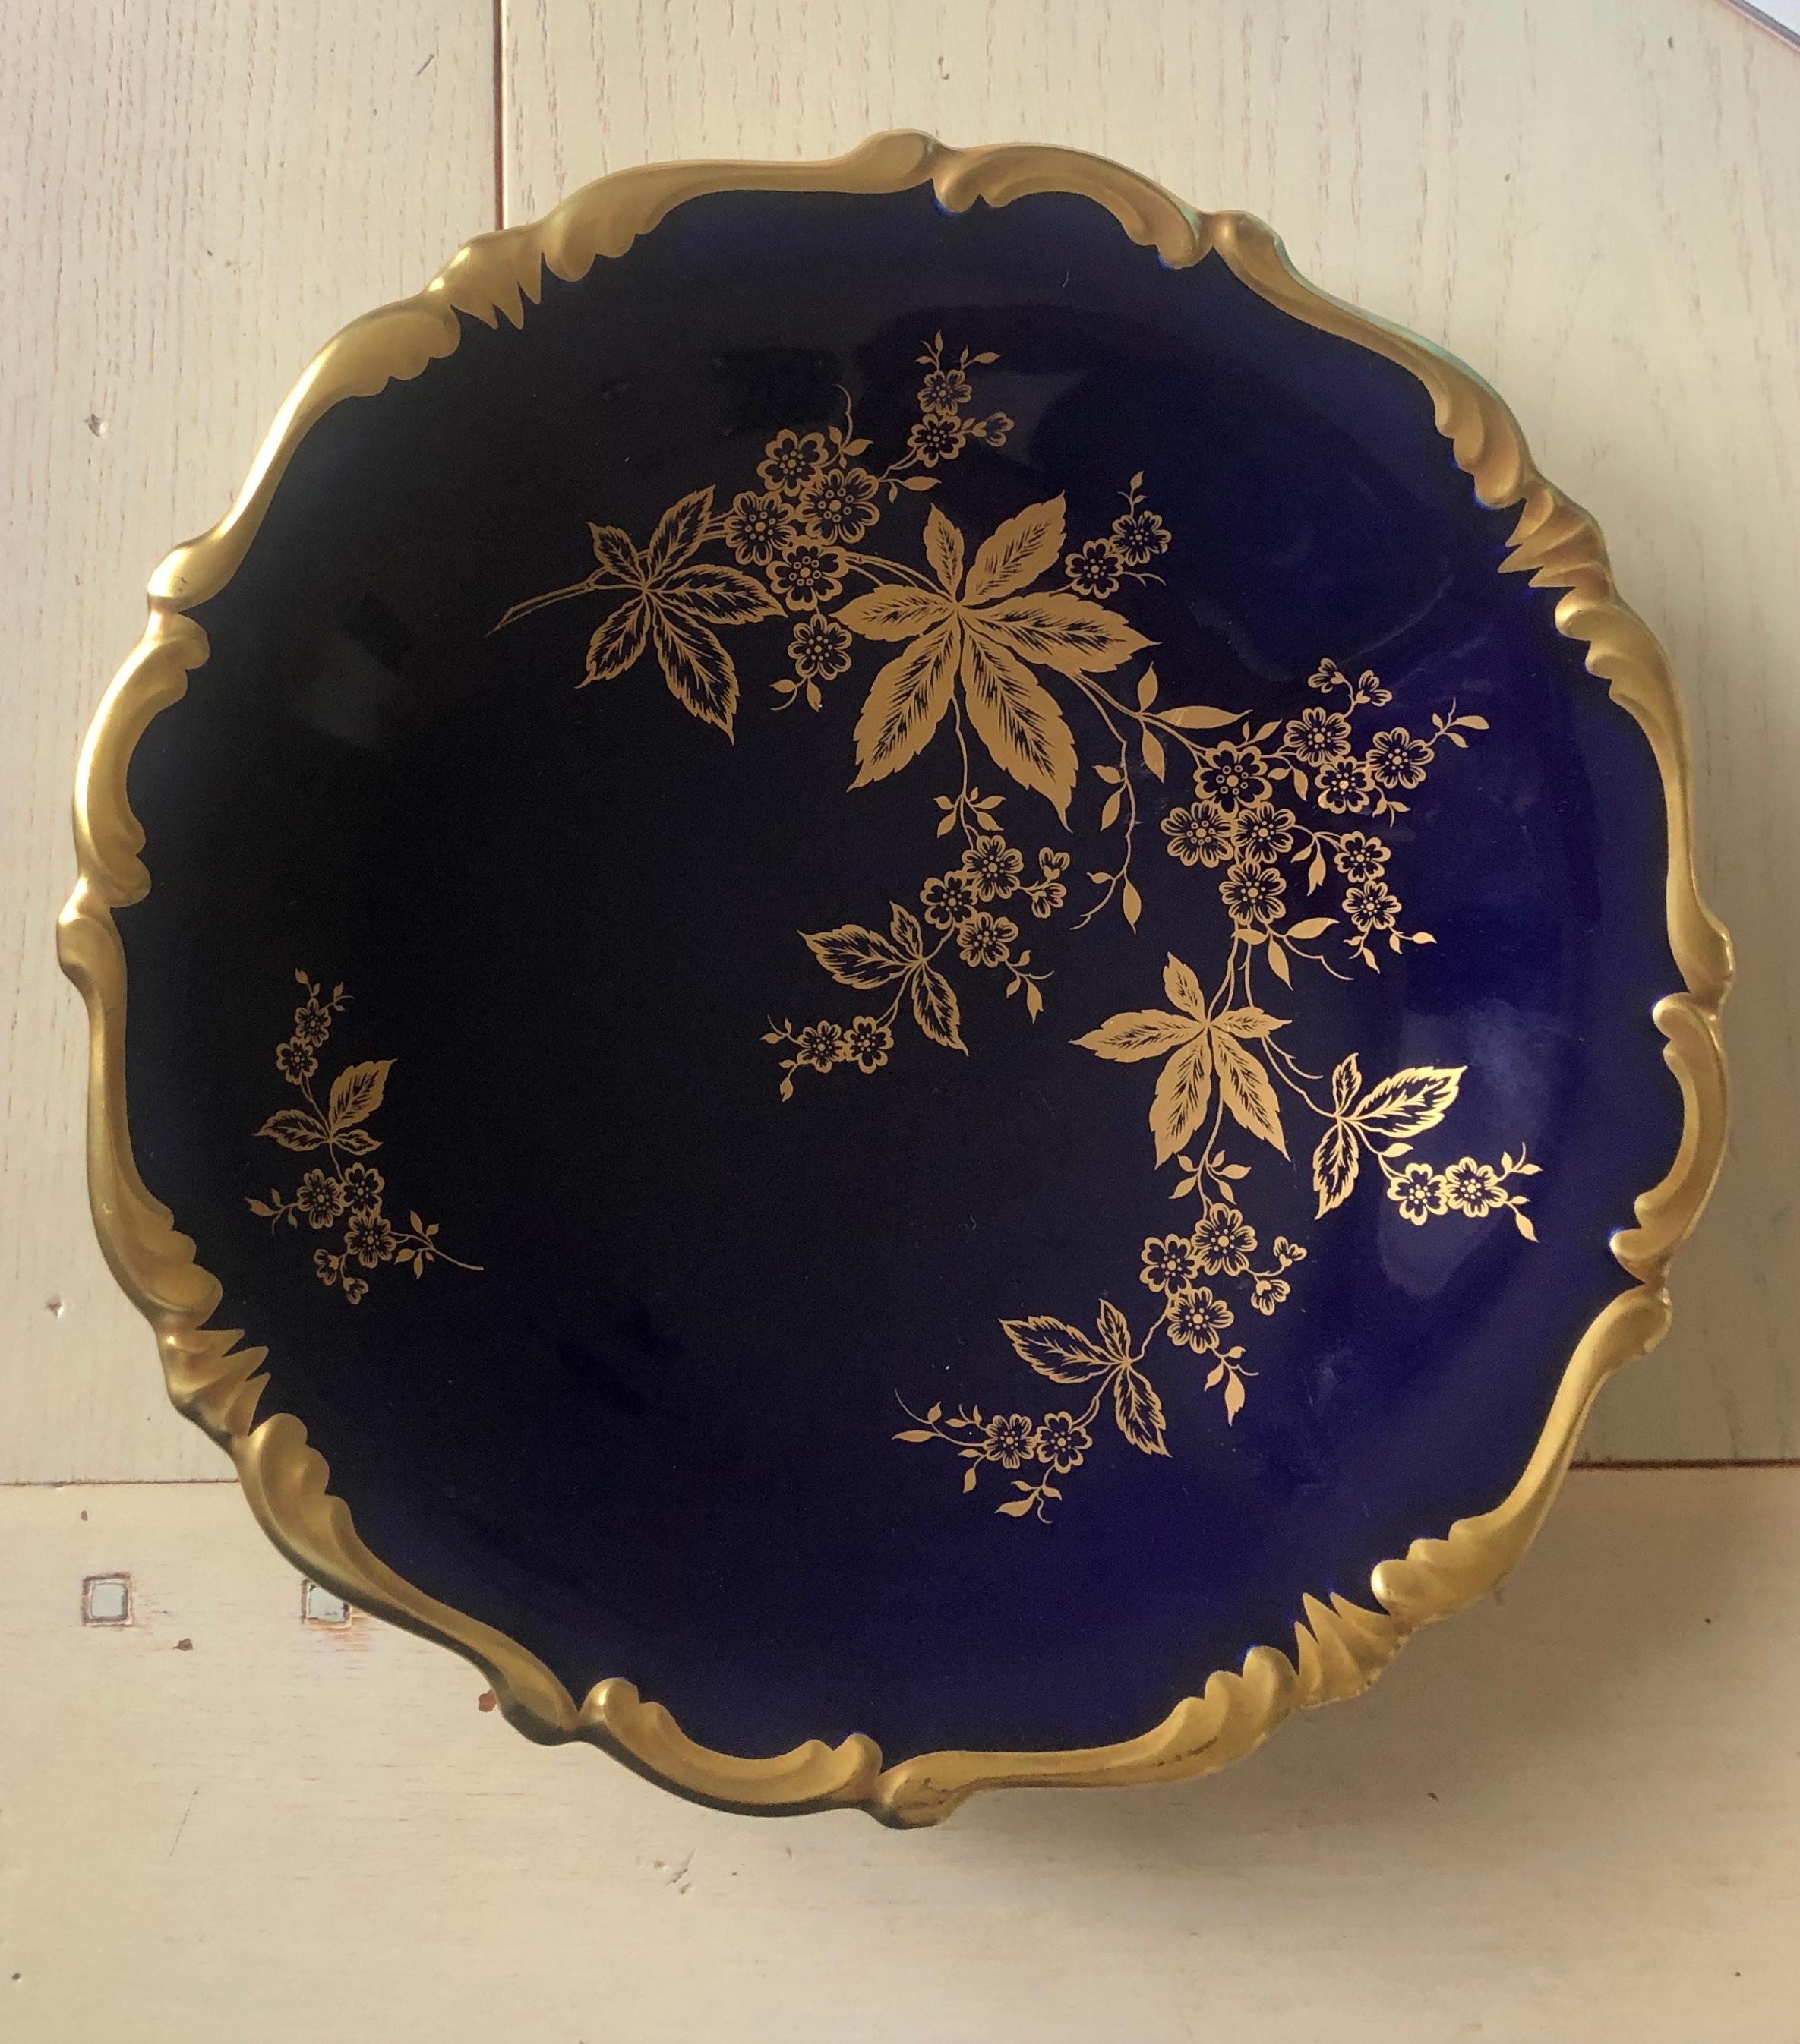 Lindner decorative plate in fine German porcelain in dark blue decorated with floral elements having golden finish.
Germany, circa 1920.

 